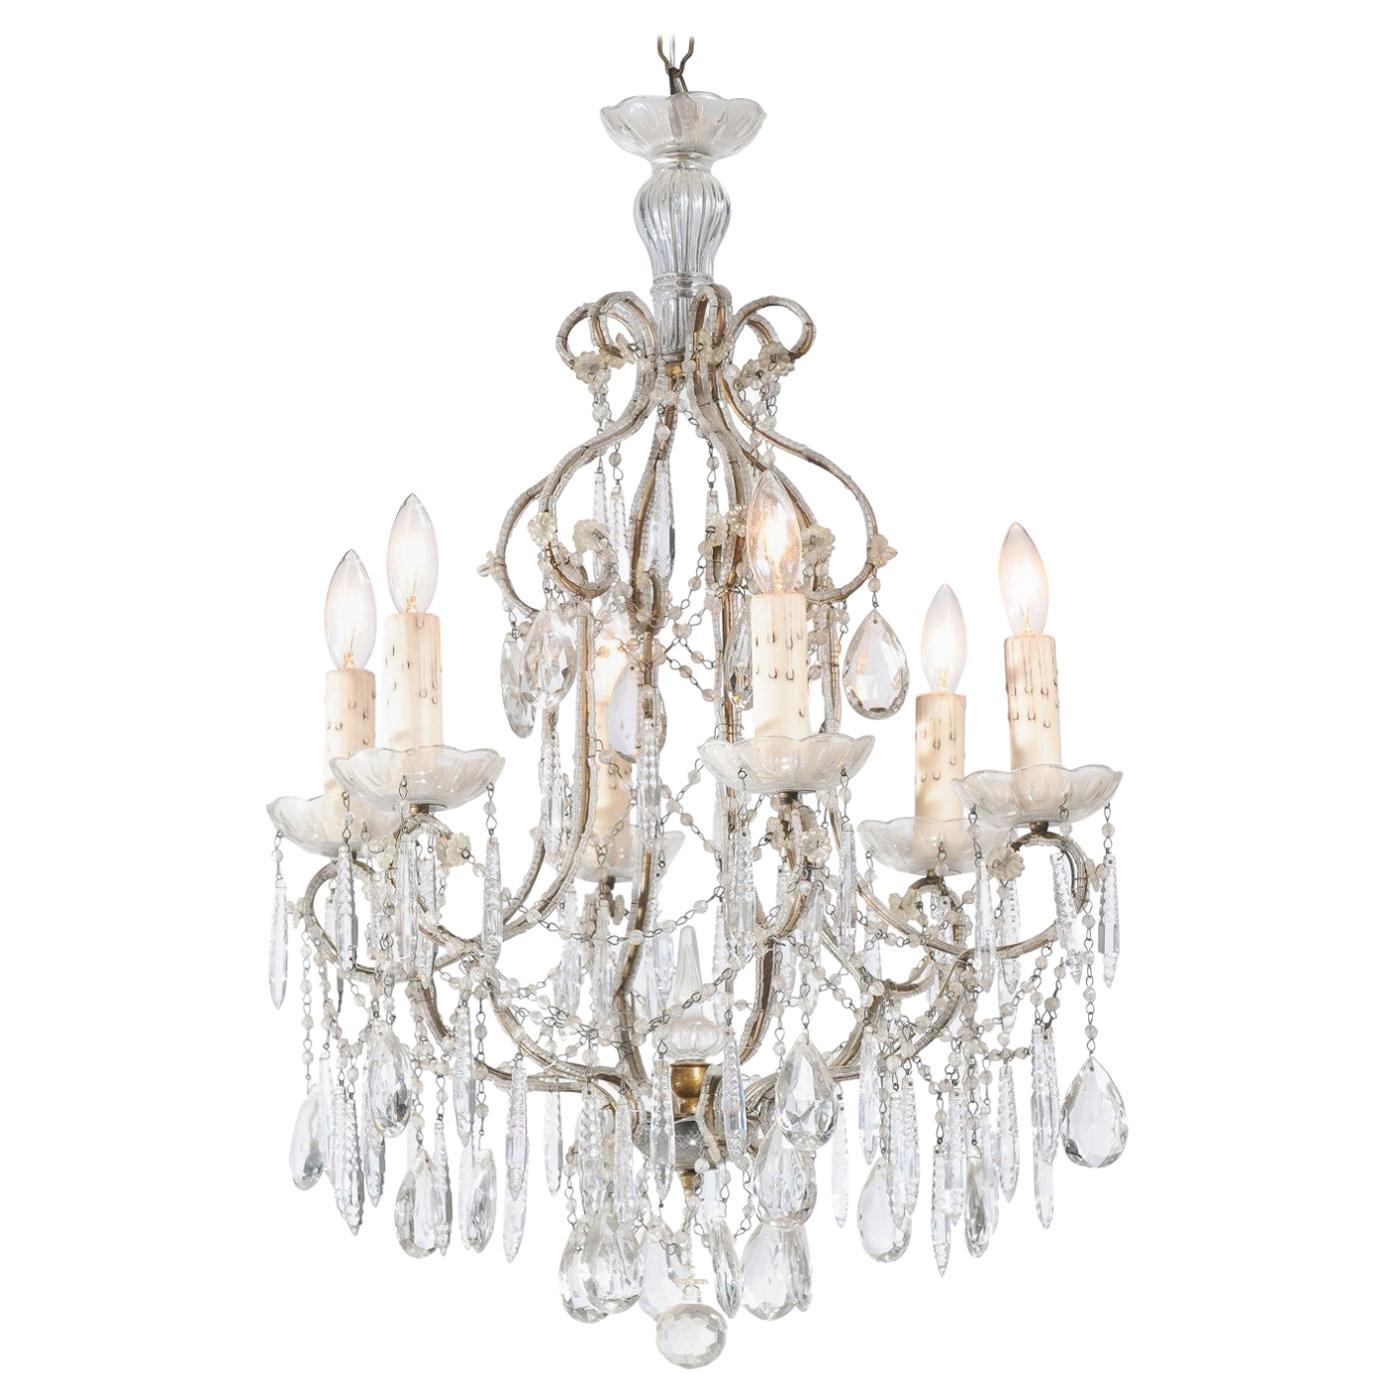 Italian 19th Century Six-Light Chandelier with Beaded Arms and Spear Crystals